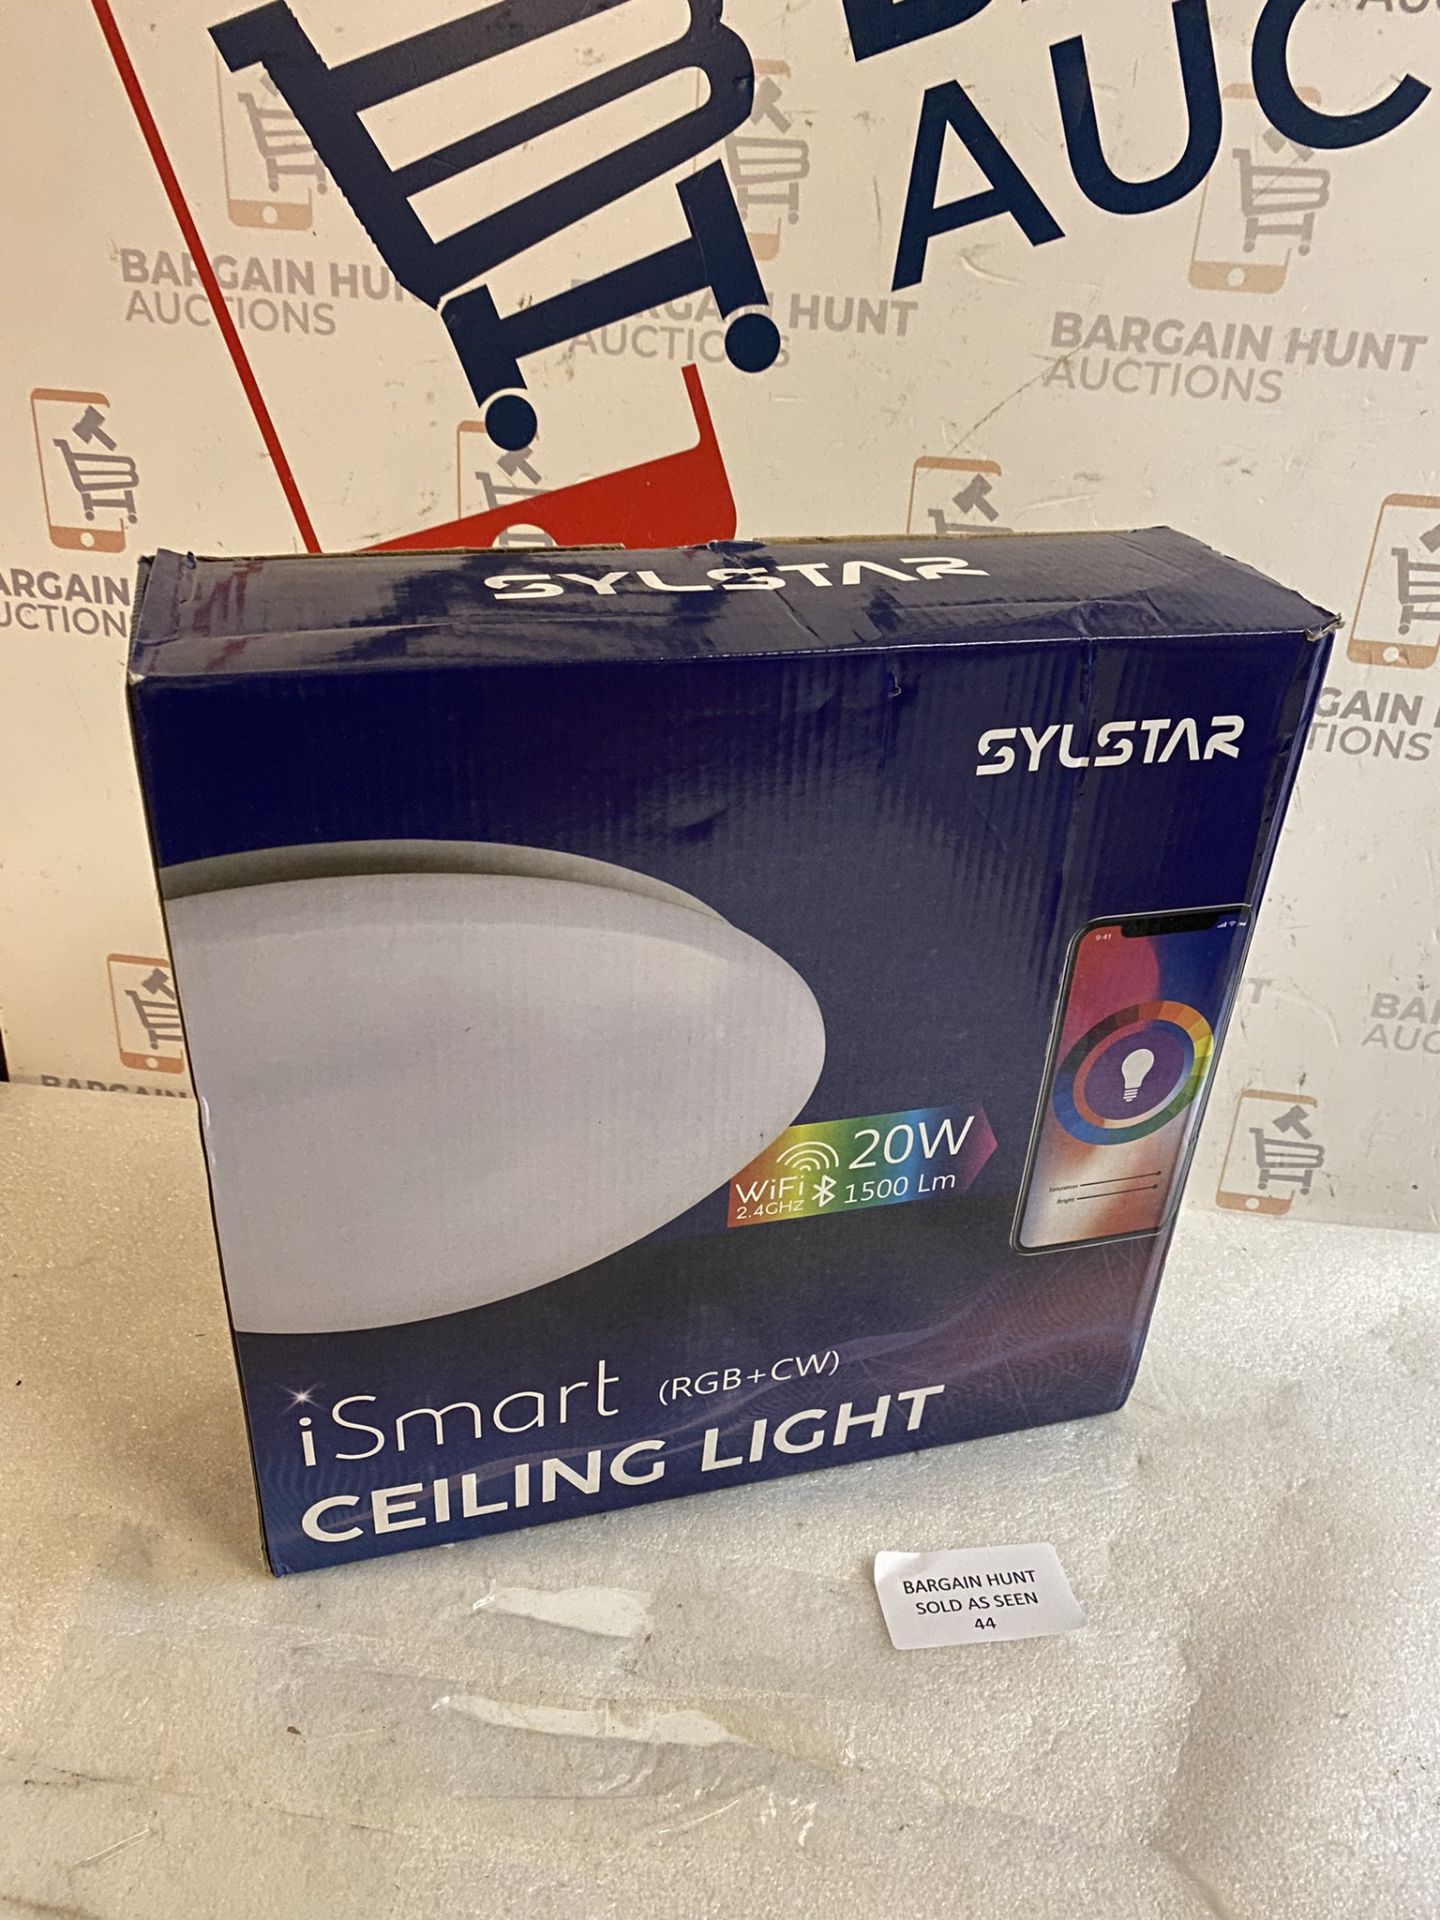 RRP £27.99 SYLSTAR Smart LED Ceiling Light, 20W 1500LM APP Control/ Voice Control Ceiling Light - Image 2 of 2